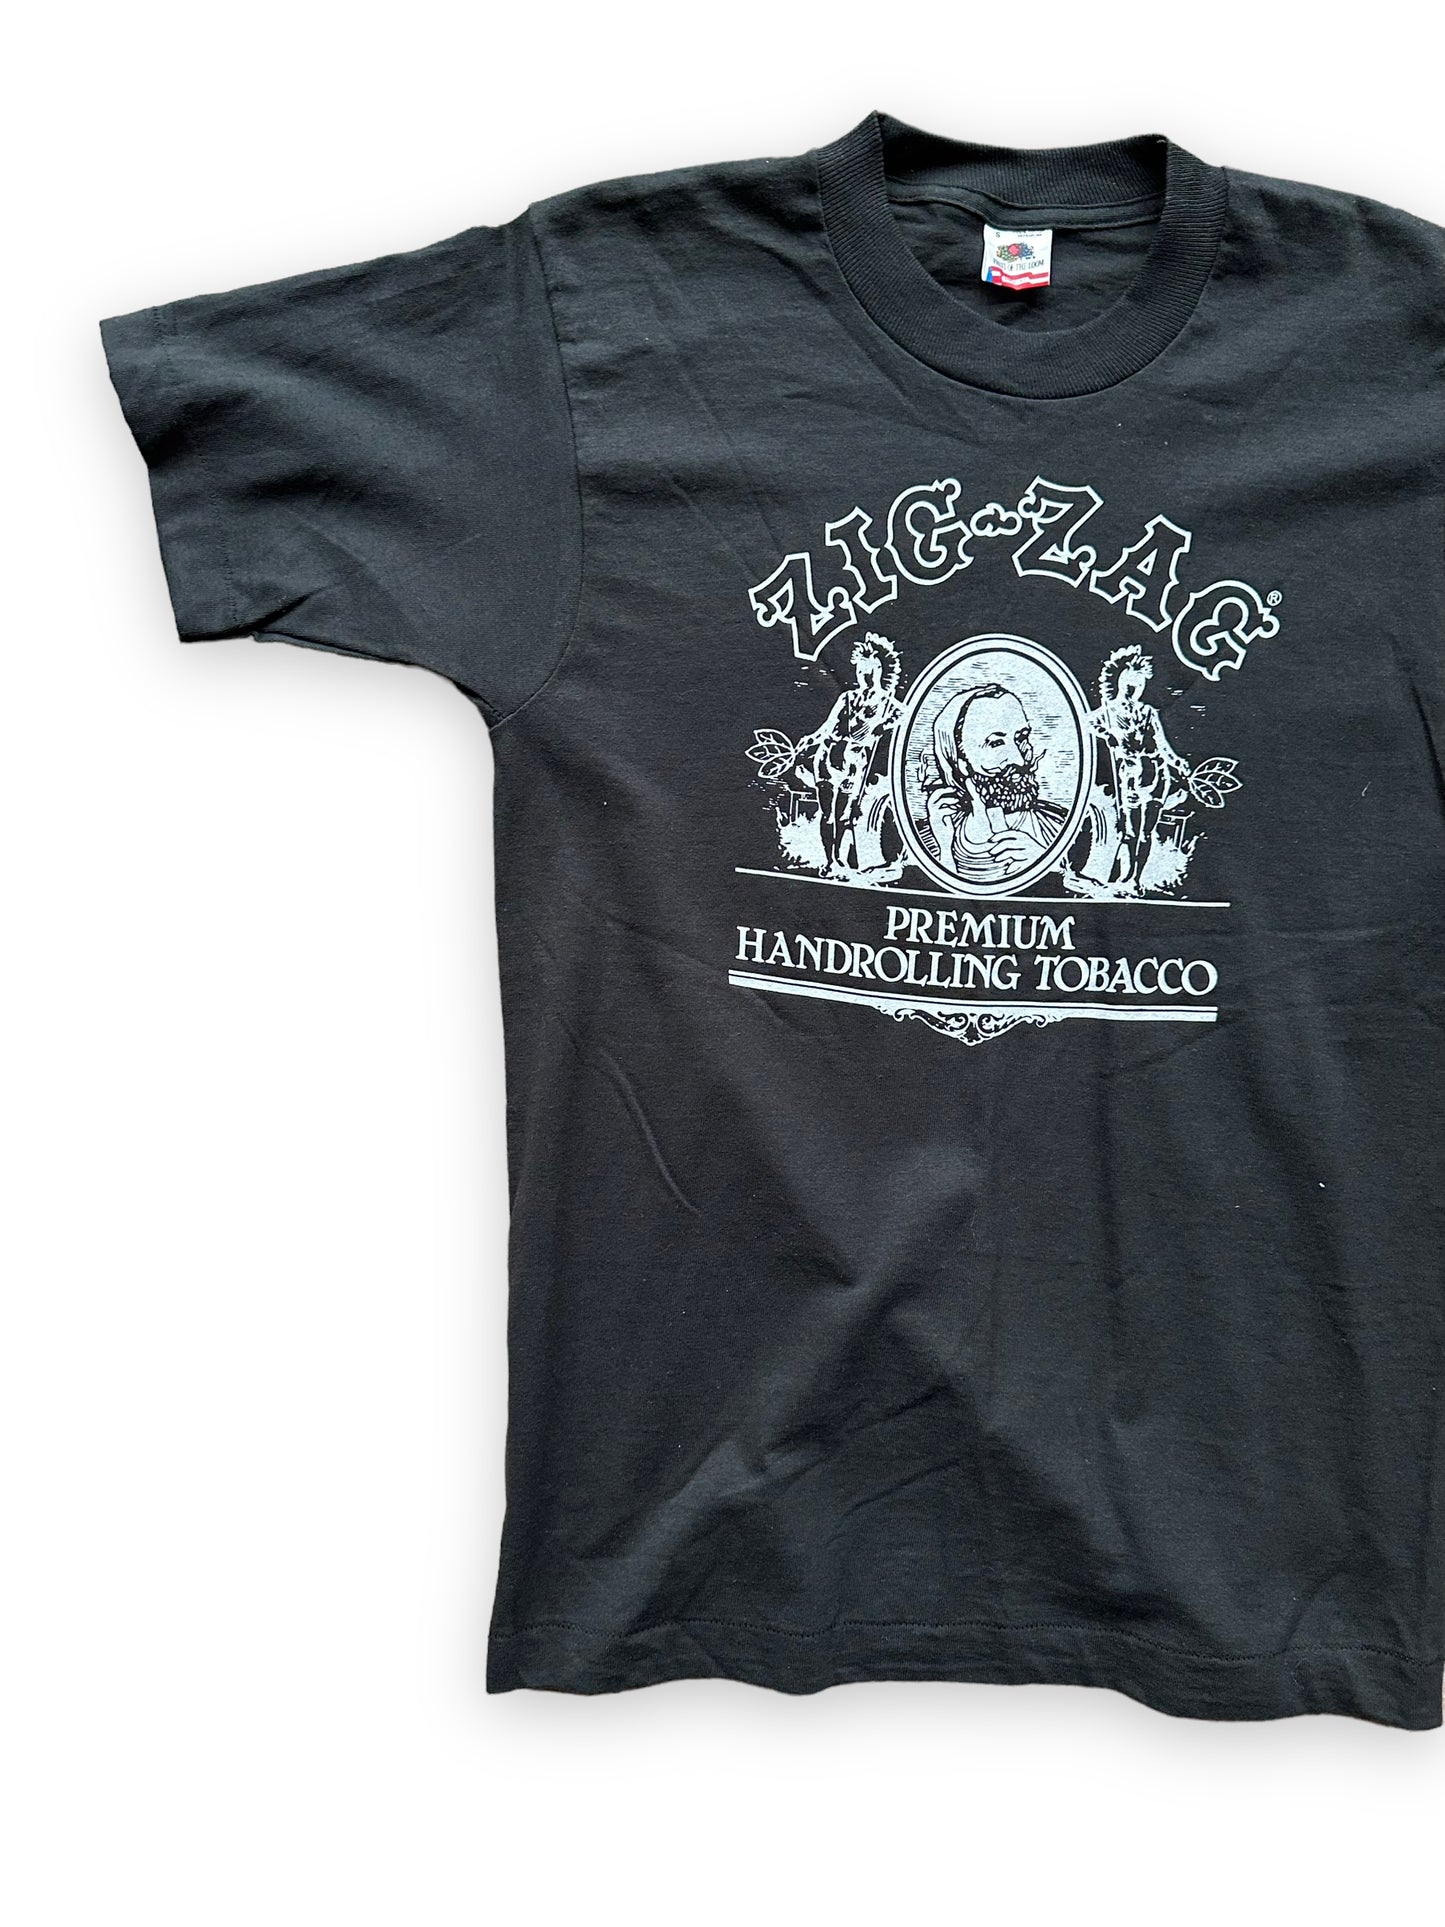 Right Front View of Vintage Black Zig-Zag Hand-Rolling Tobacco Tee SZ S | Seattle Vintage Weed Tees | Barn Owl Seattle